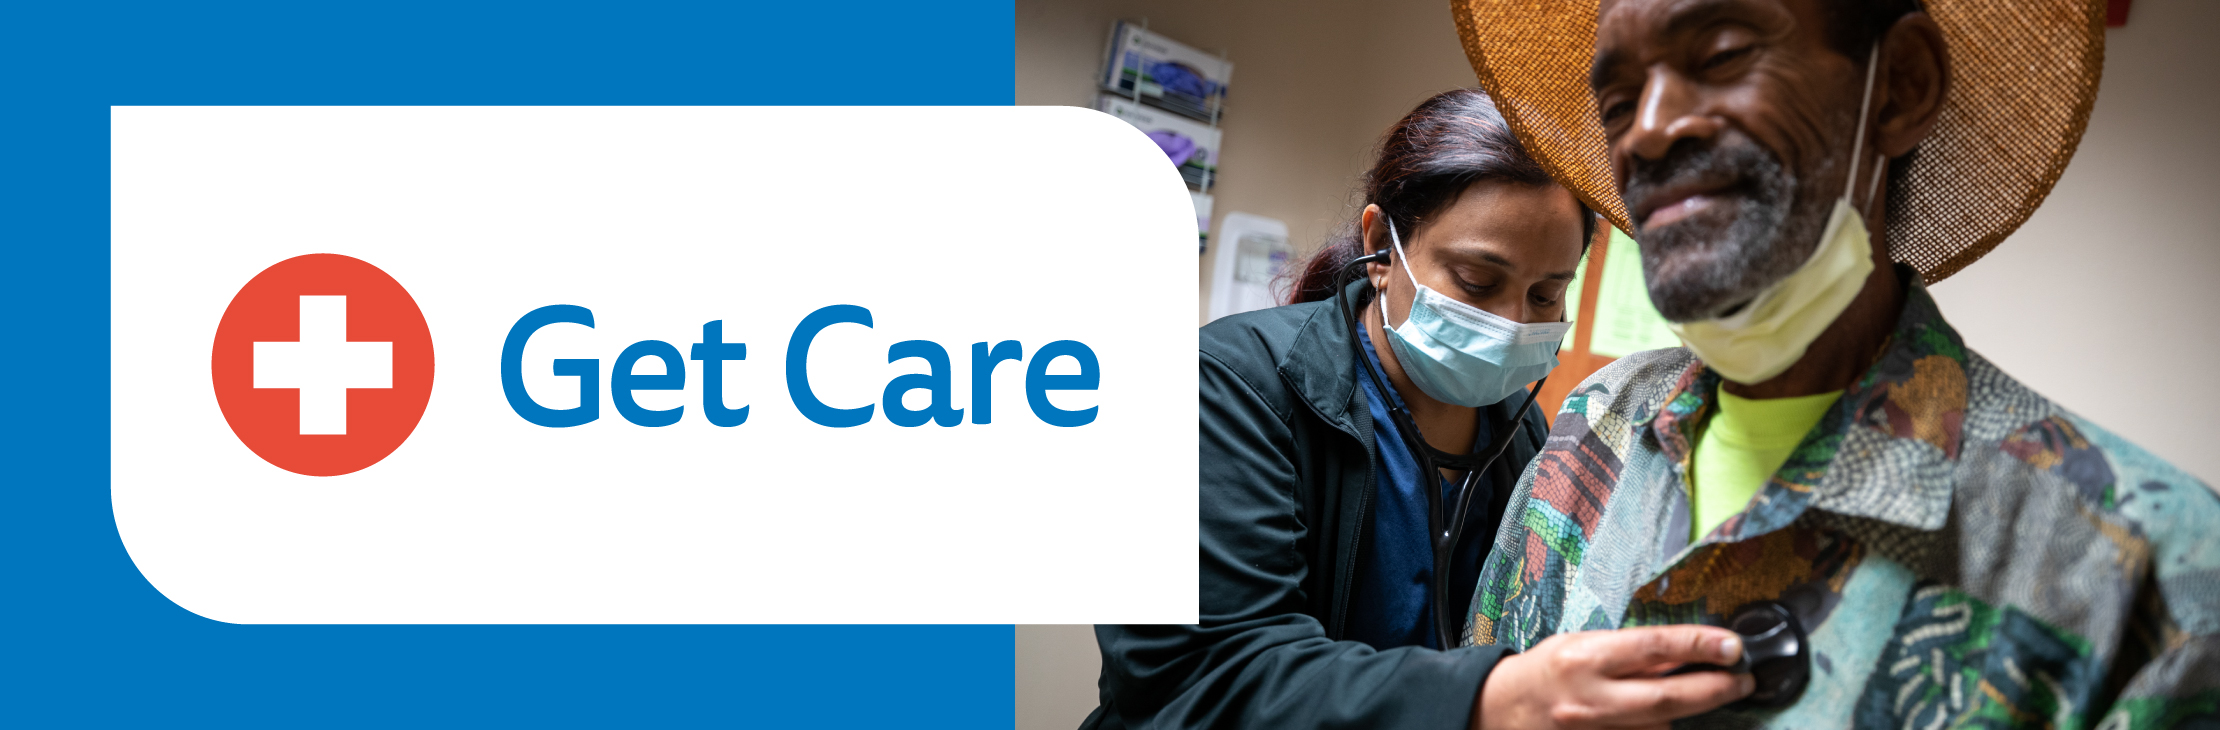 Get Care Banner